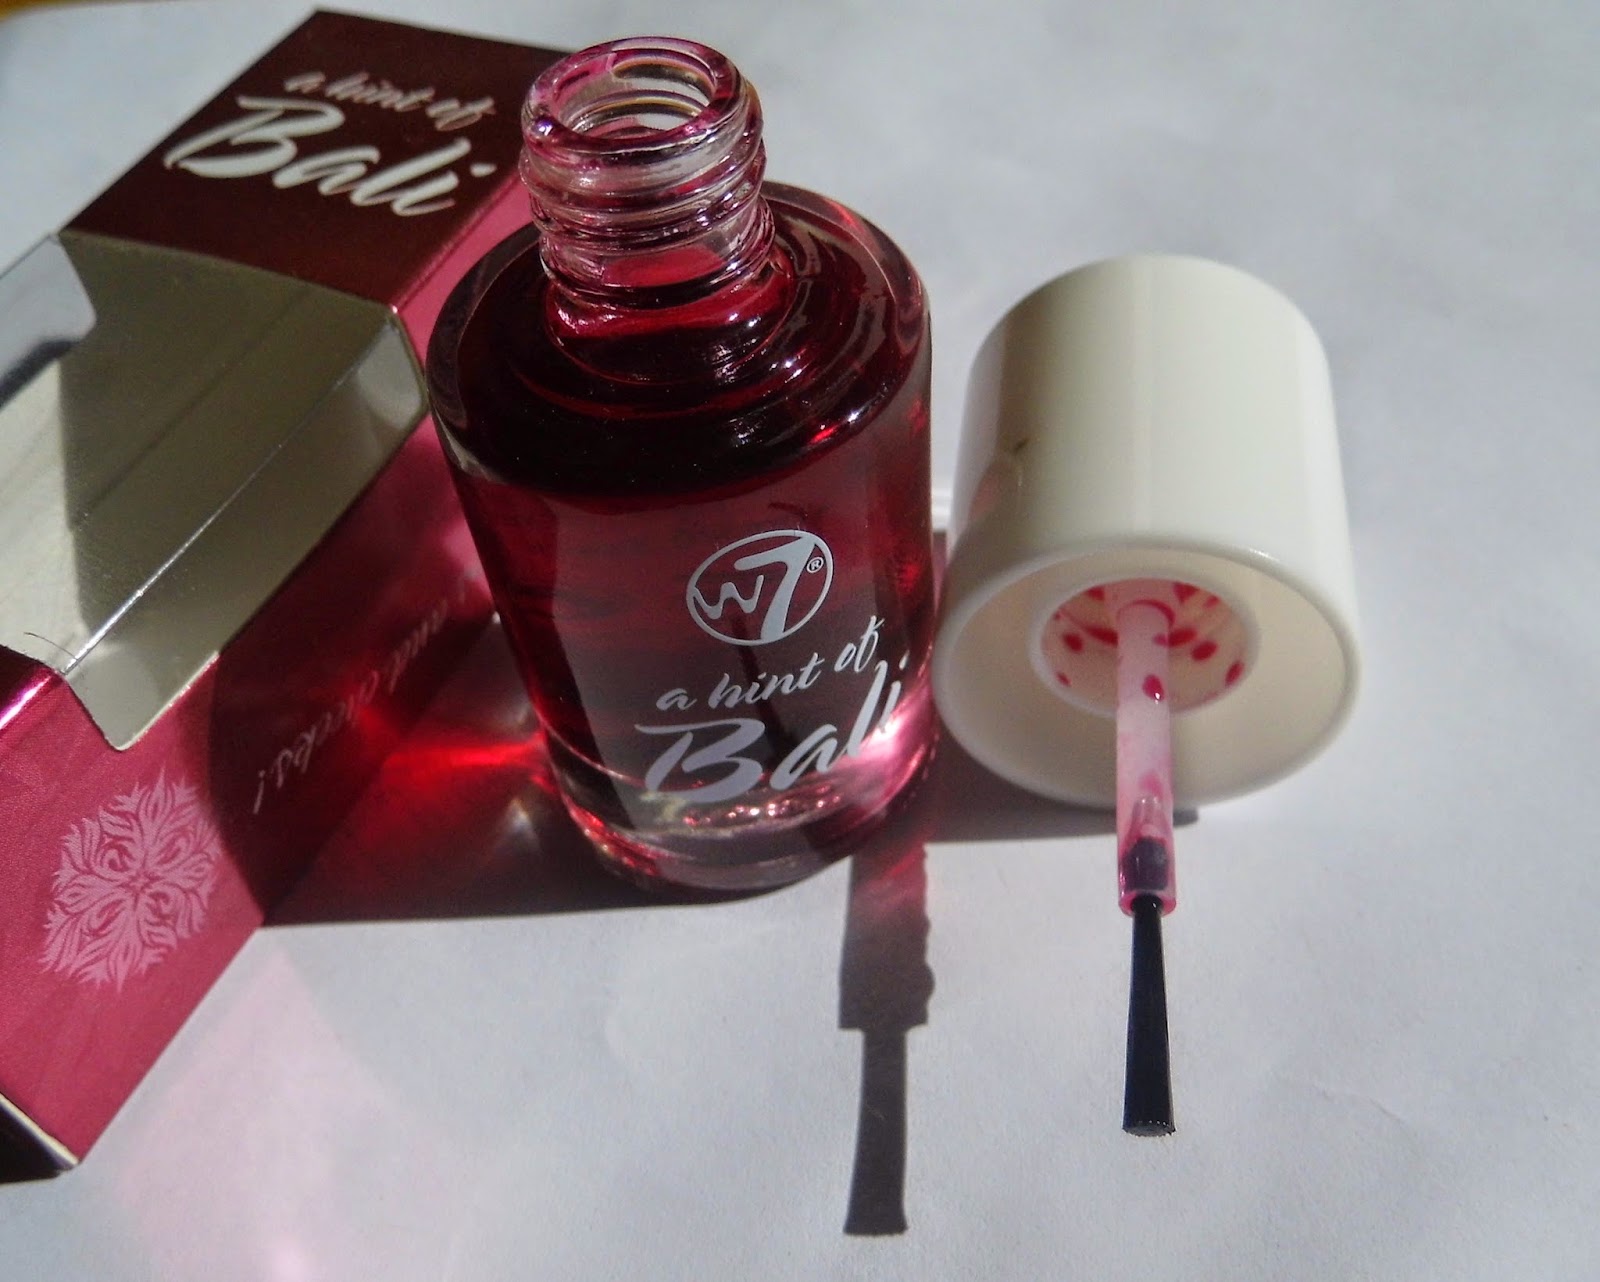 w7-cosmetics-a-hint-of-bali-cheek-and-lip-stain